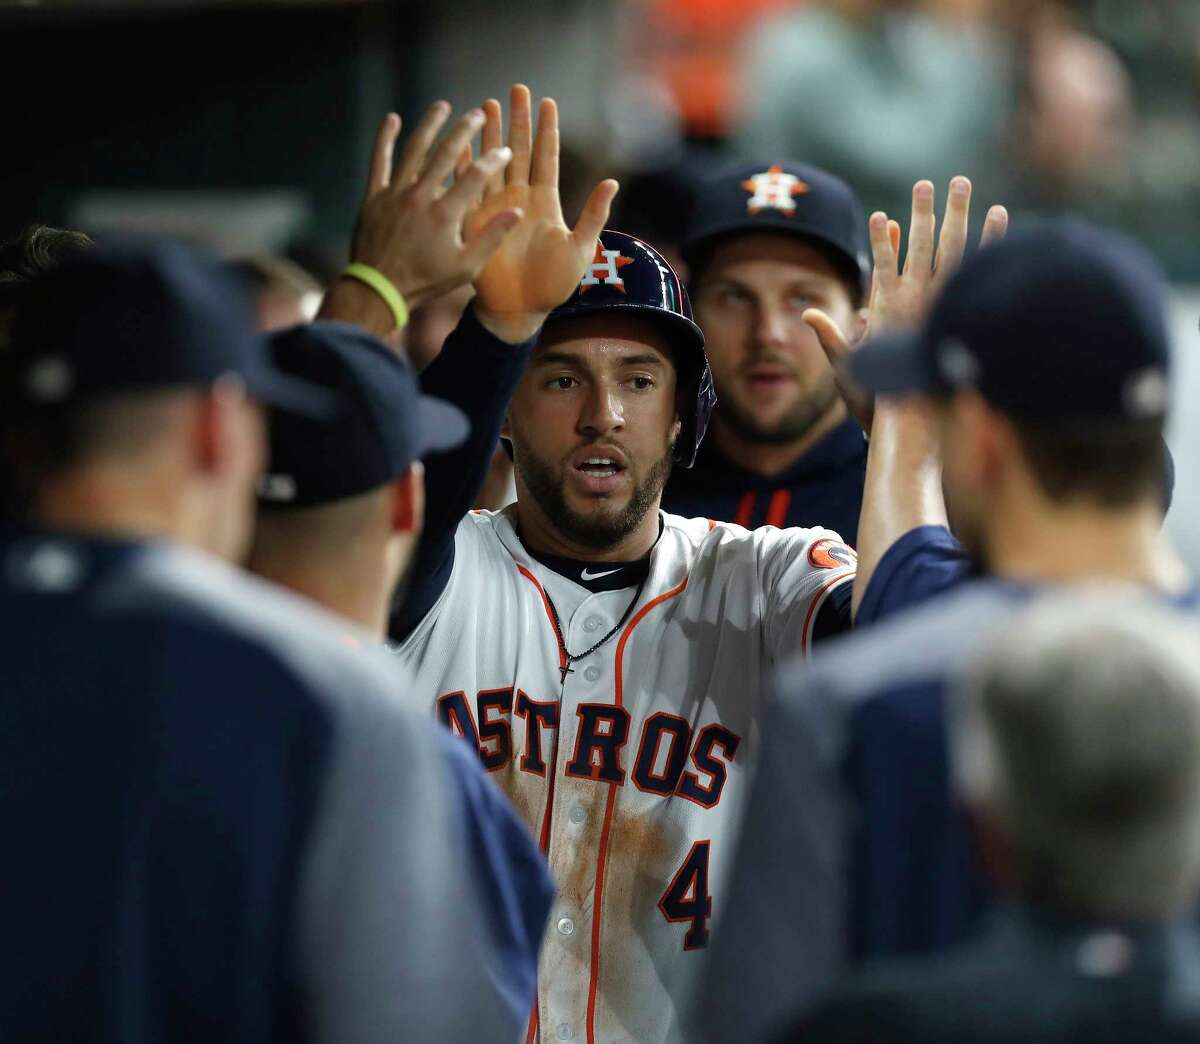 Houston Astros center fielder George Springer (4) celebrates his run scored on Houston Astros second baseman Jose Altuve's RBI double during the first inning of an MLB baseball game at Minute Maid Park, Monday, May 22, 2017. ( Karen Warren / Houston Chronicle )